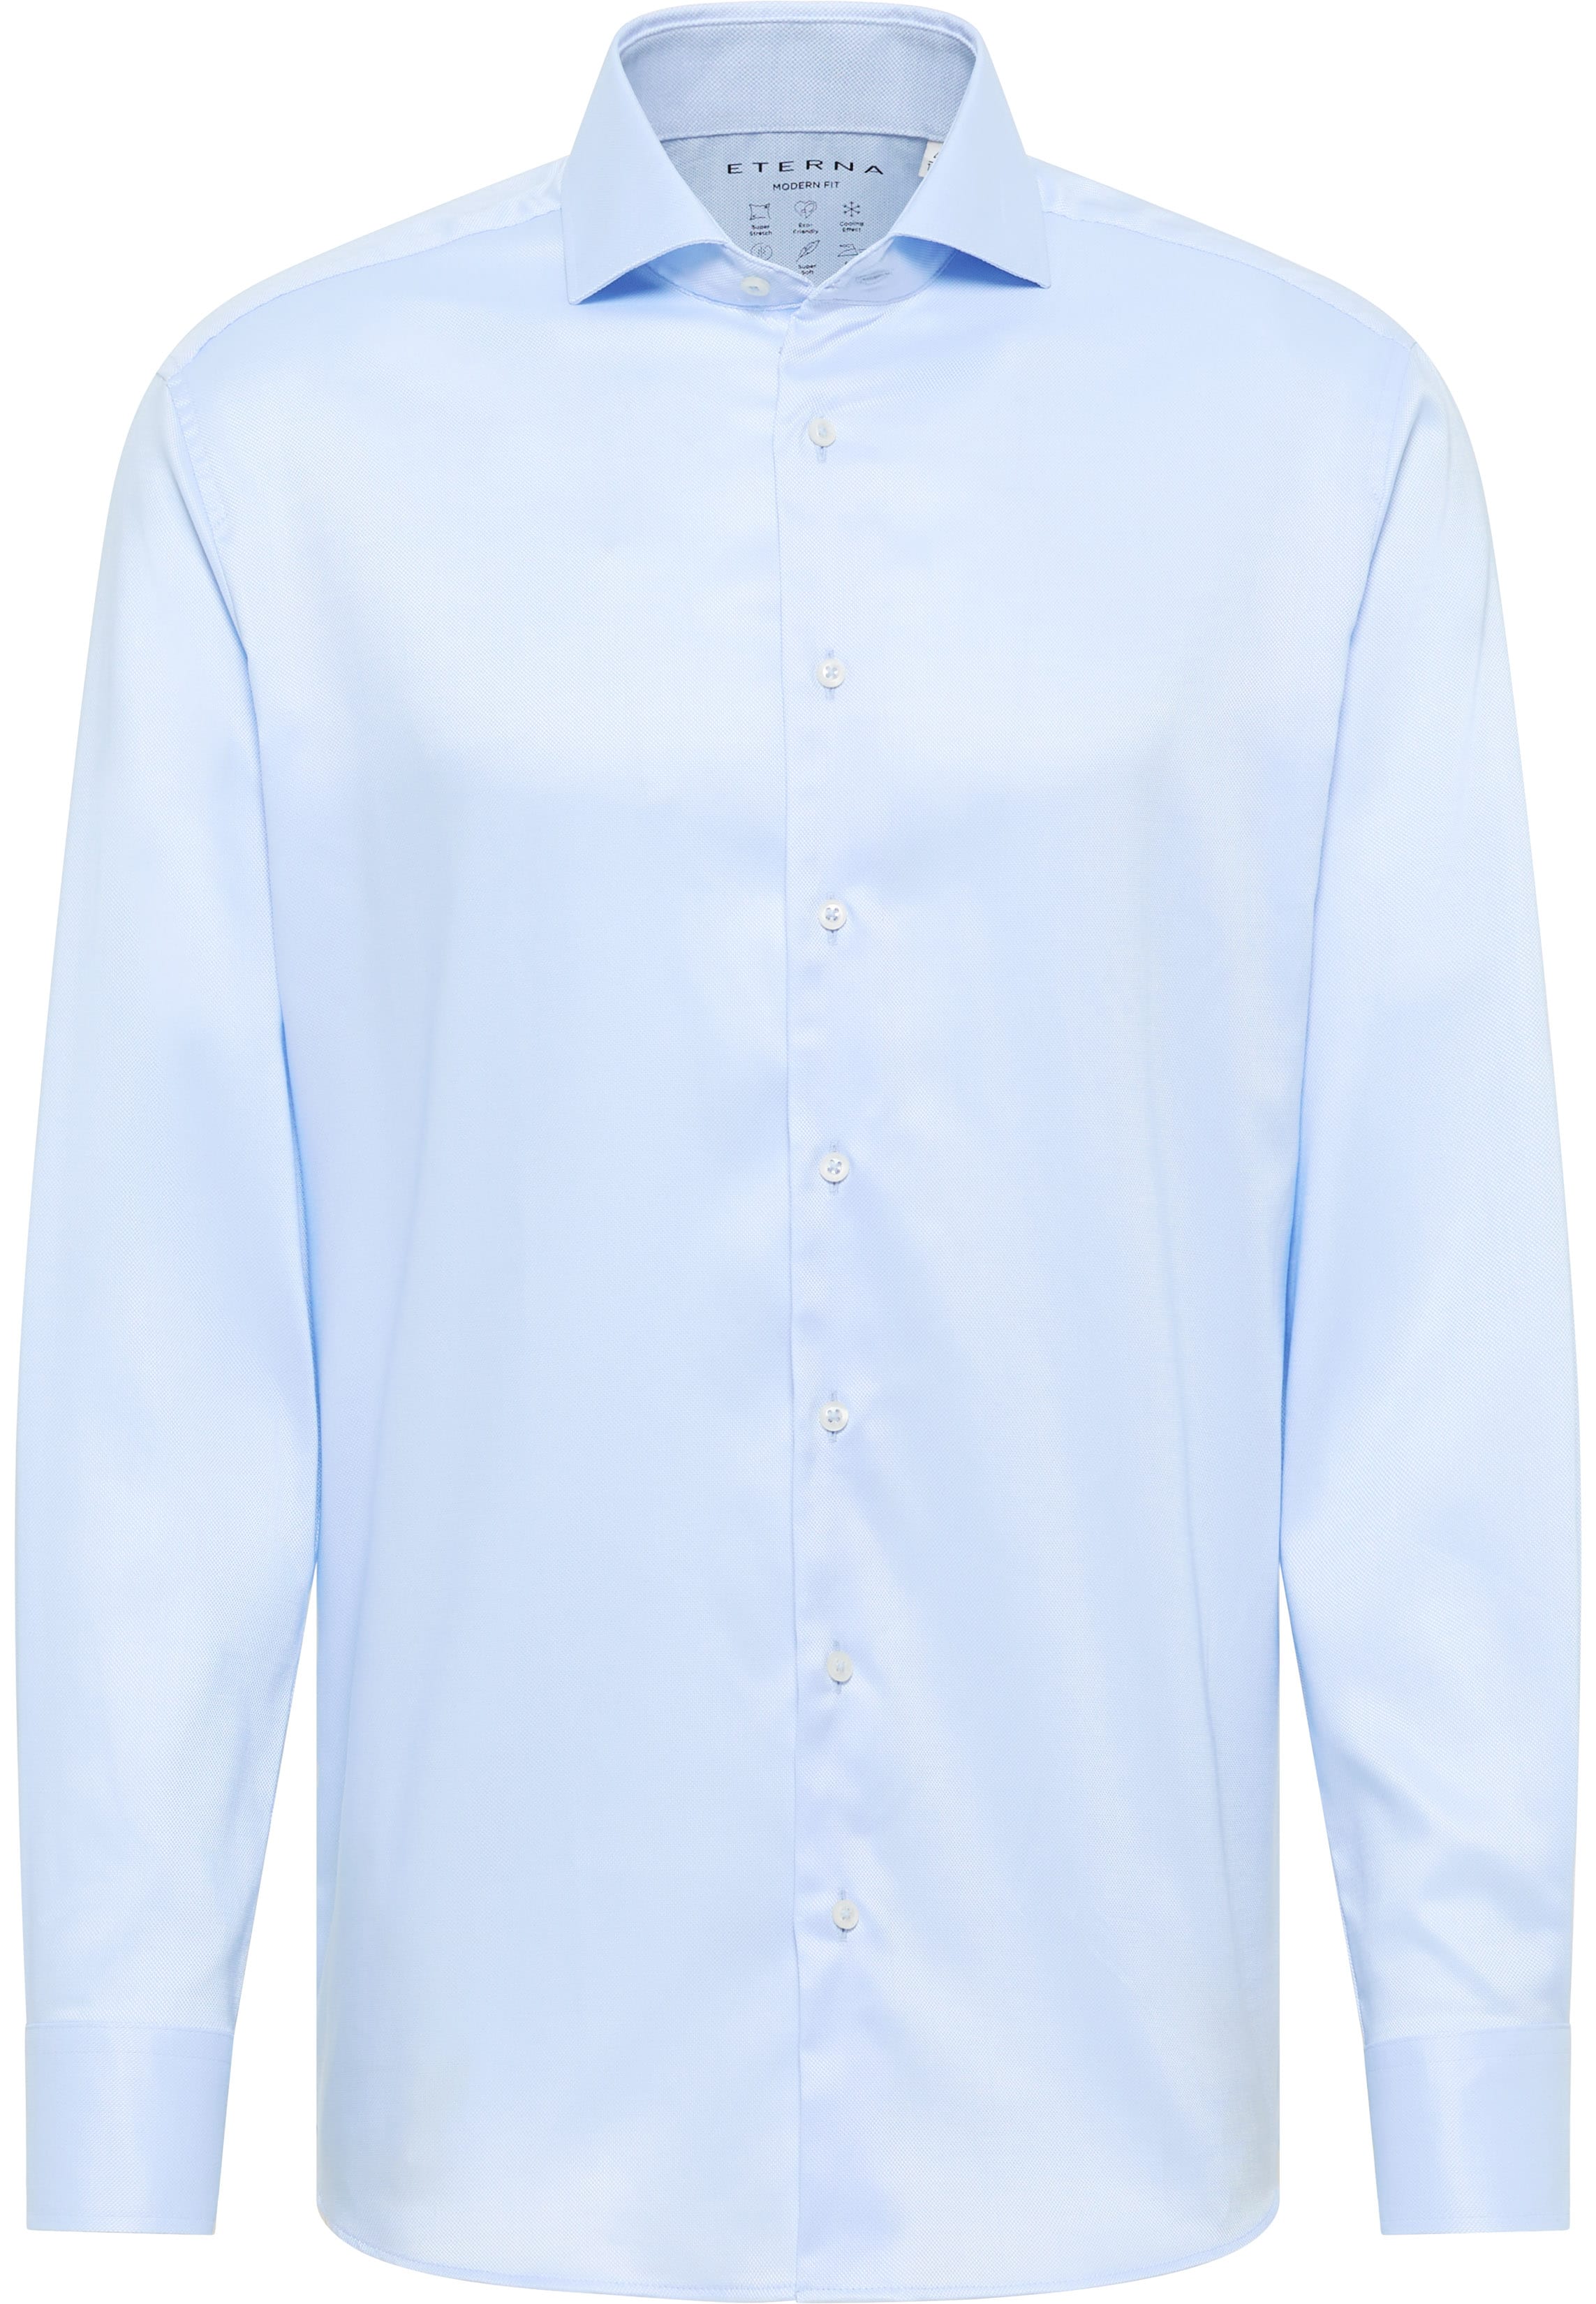 MODERN FIT Performance Shirt in light blue structured